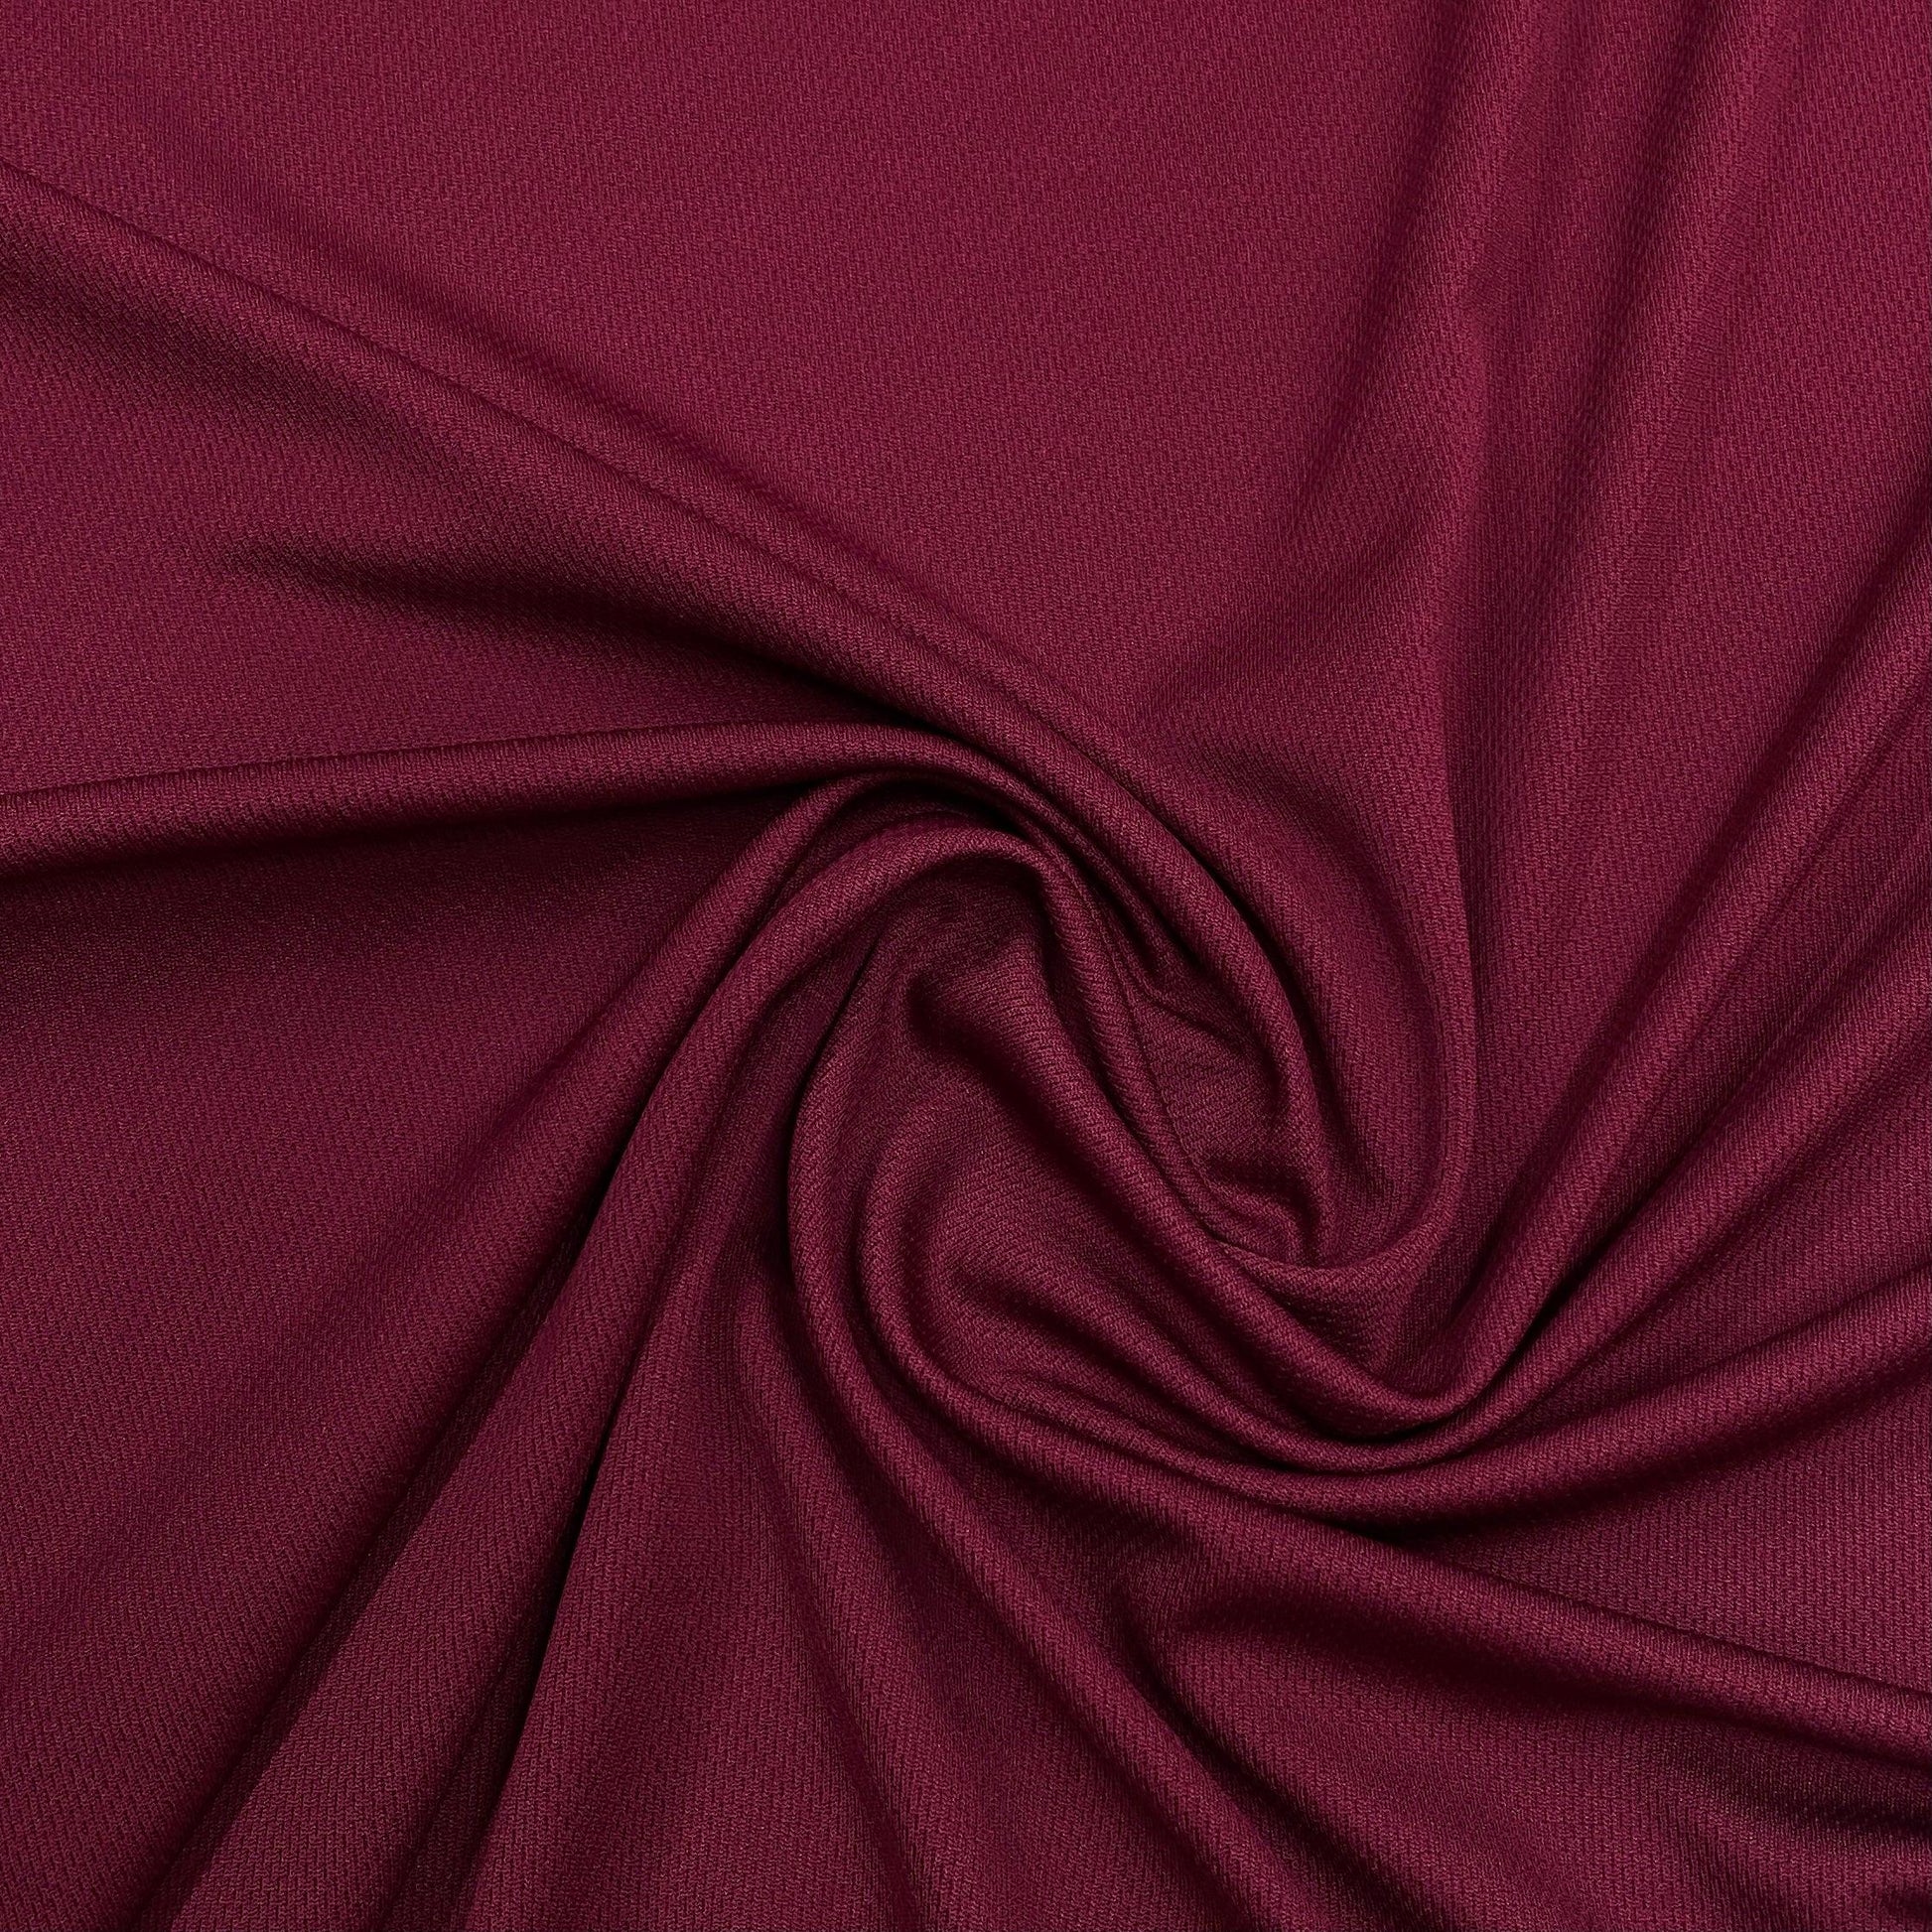 Burgundy Polyester Athletic Wicking Jersey Fabric - Nature's Fabrics